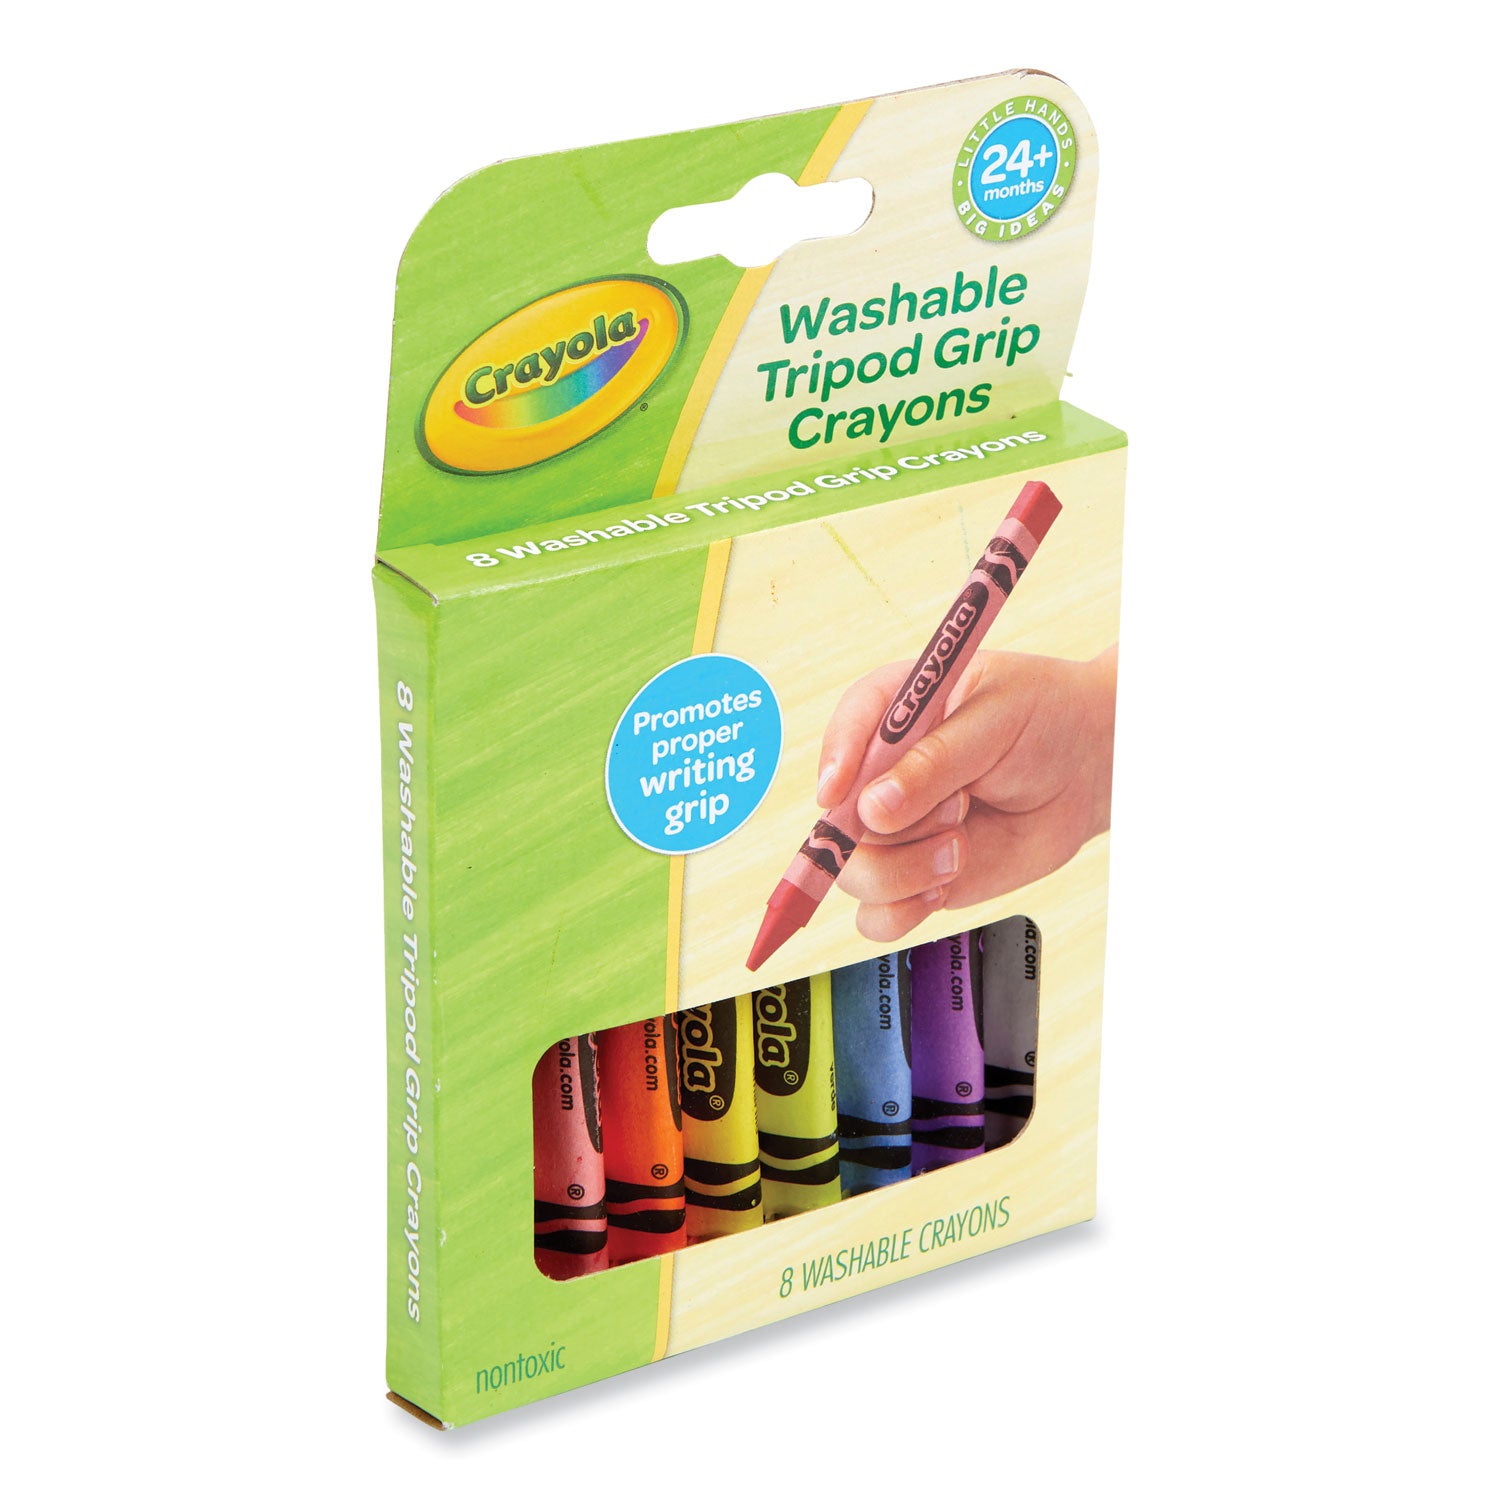 washable-tripod-grip-crayons-assorted-colors-8-pack_cyo811460 - 3